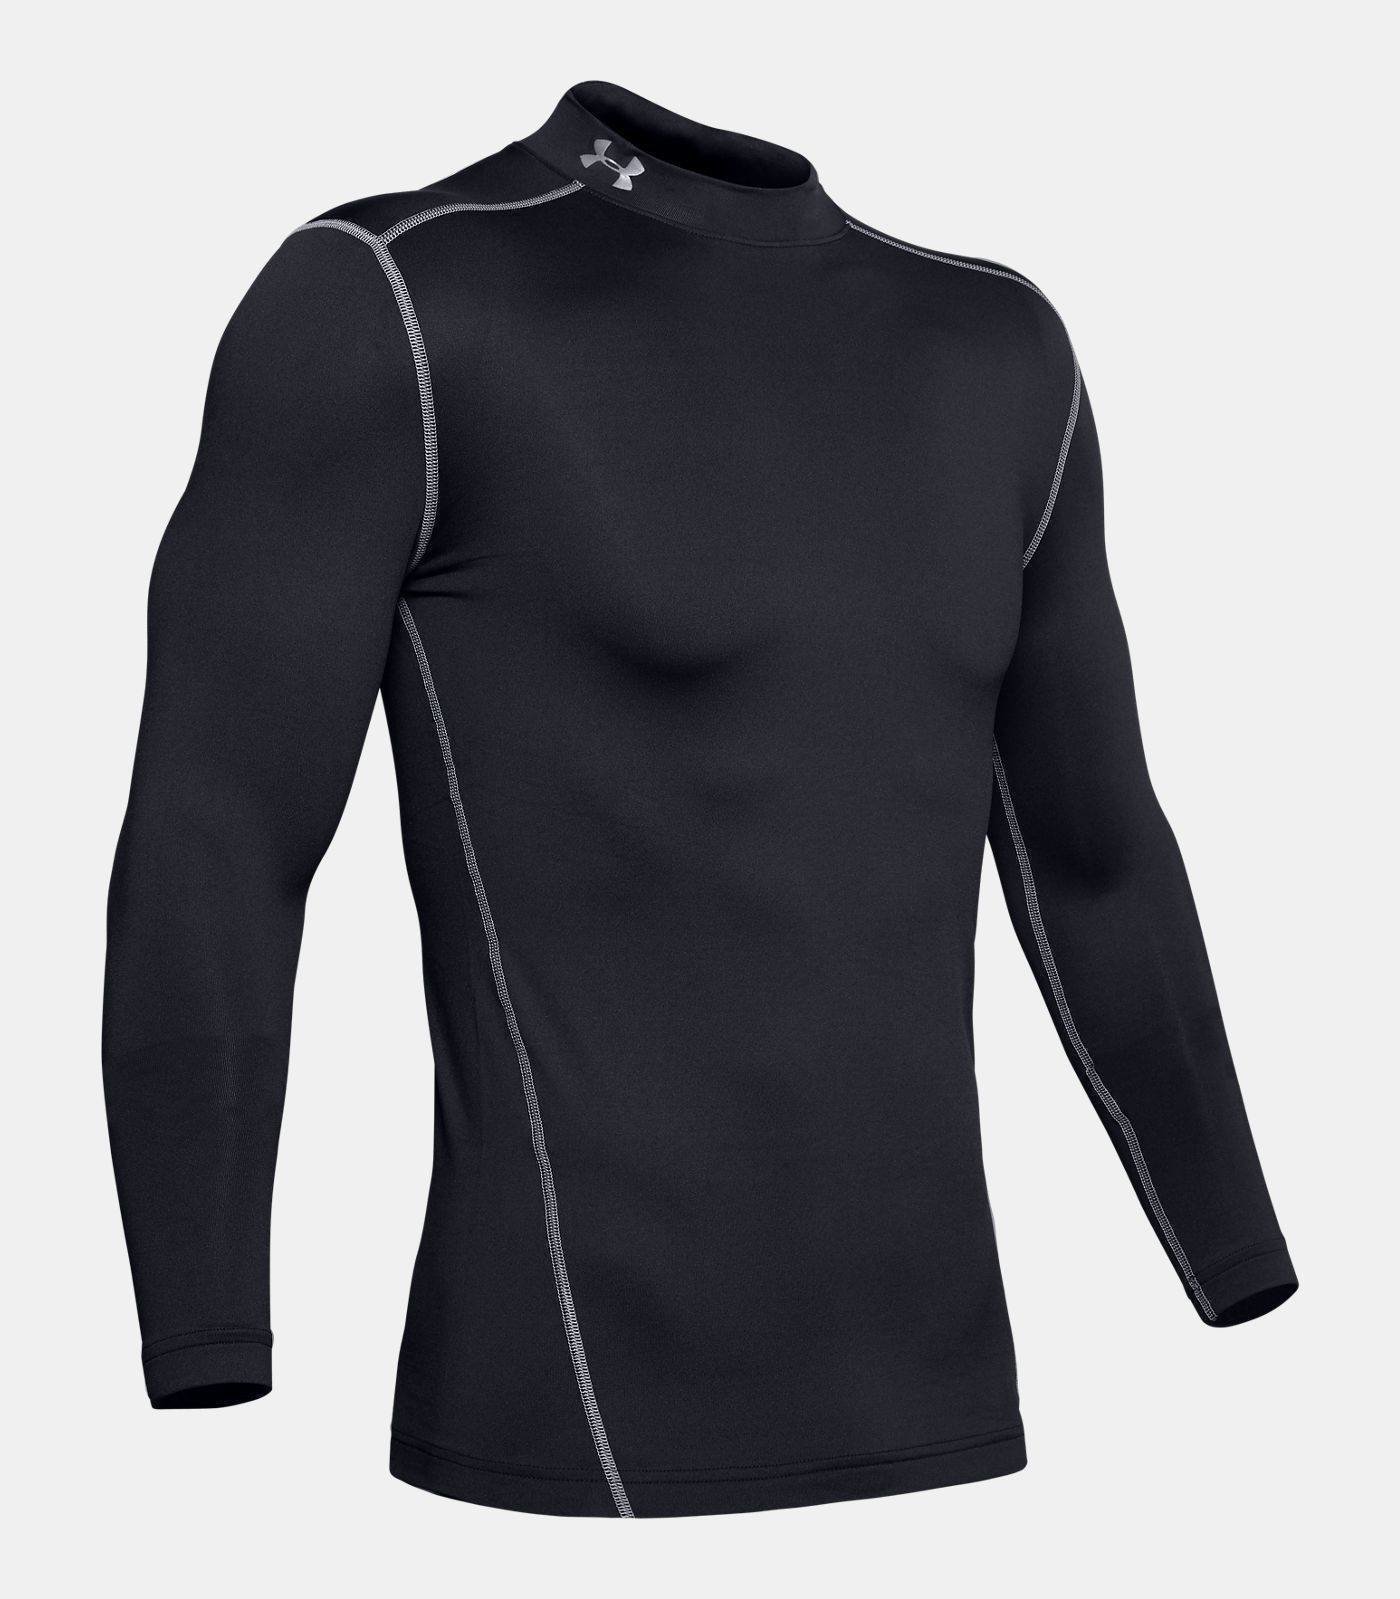 Thermal Clothing Under Armour ColdGear Compression Mock Black/Steel M